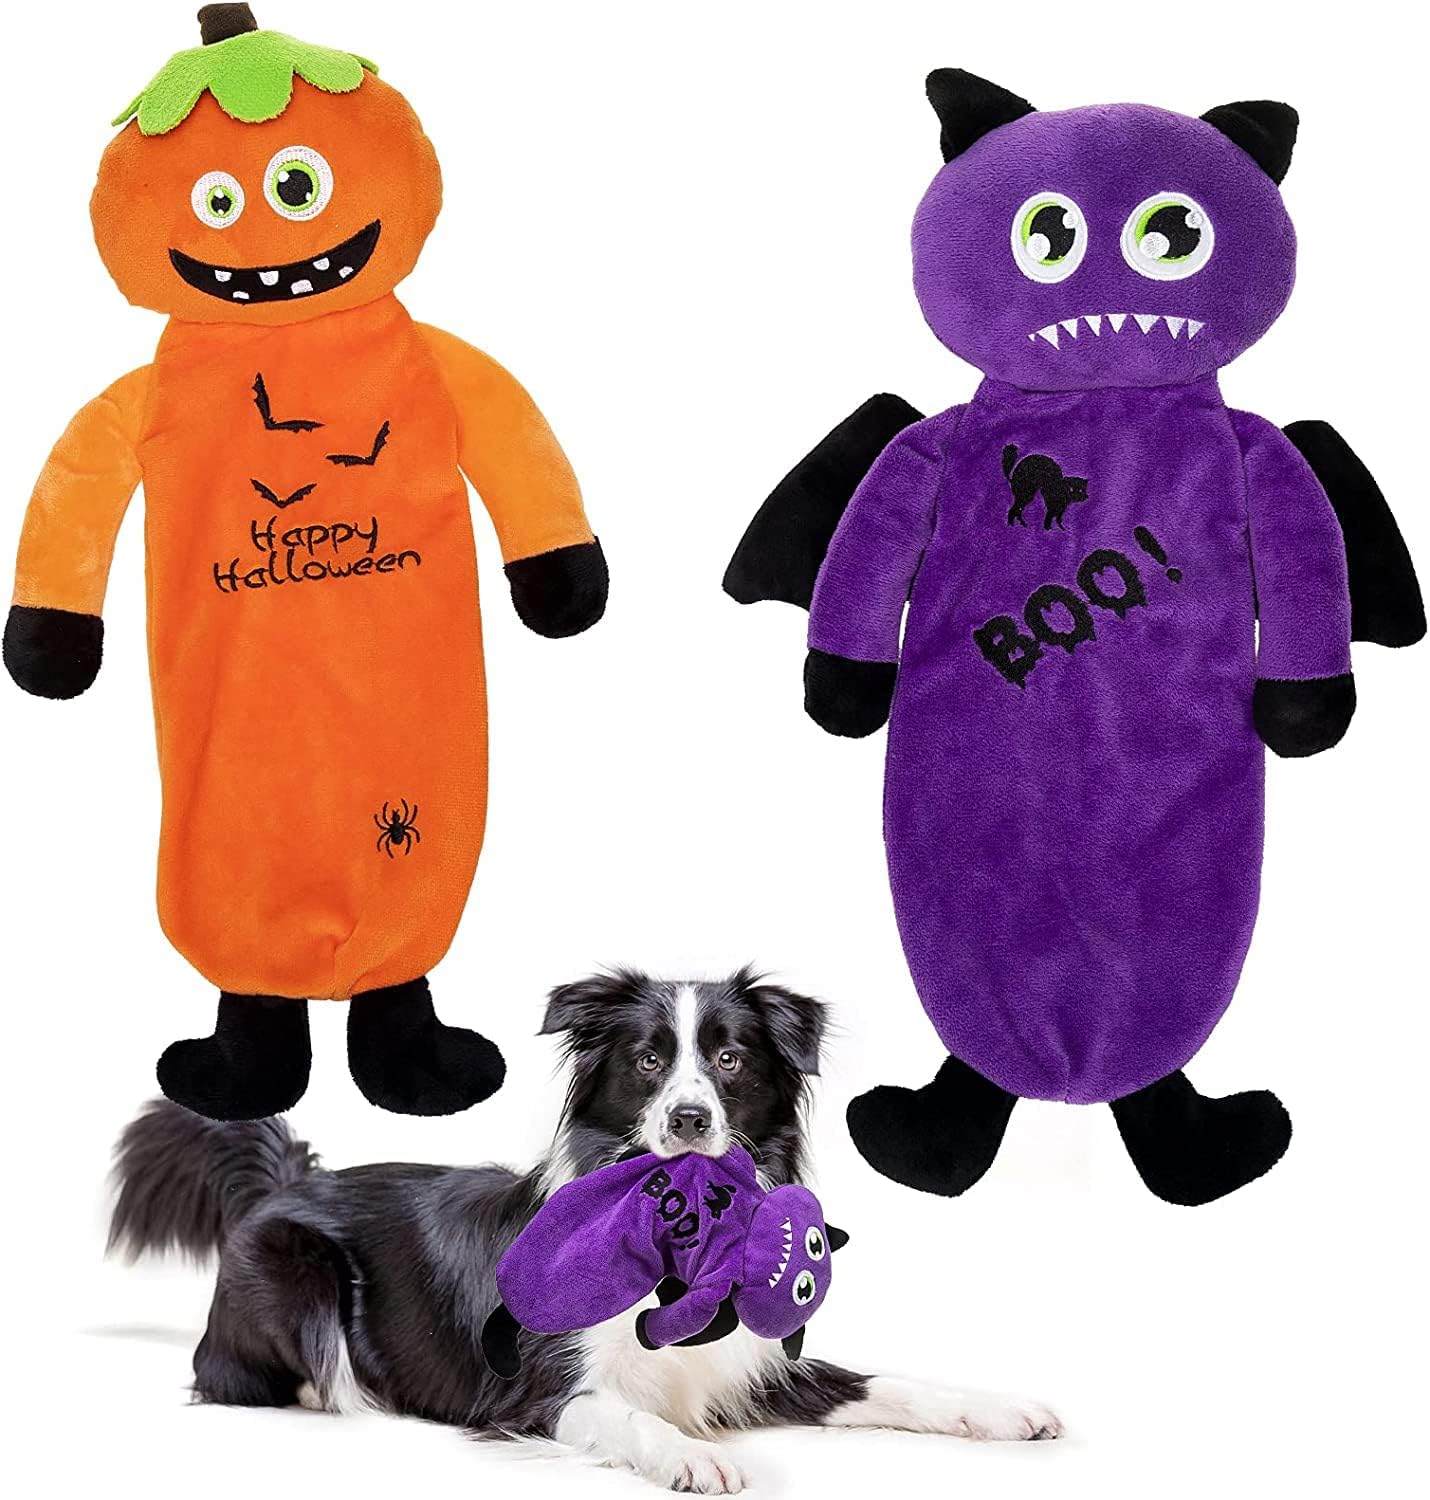 BINGPET Dog Squeaky Toys - 2 Pack No Stuffing Halloween Toy for Dogs